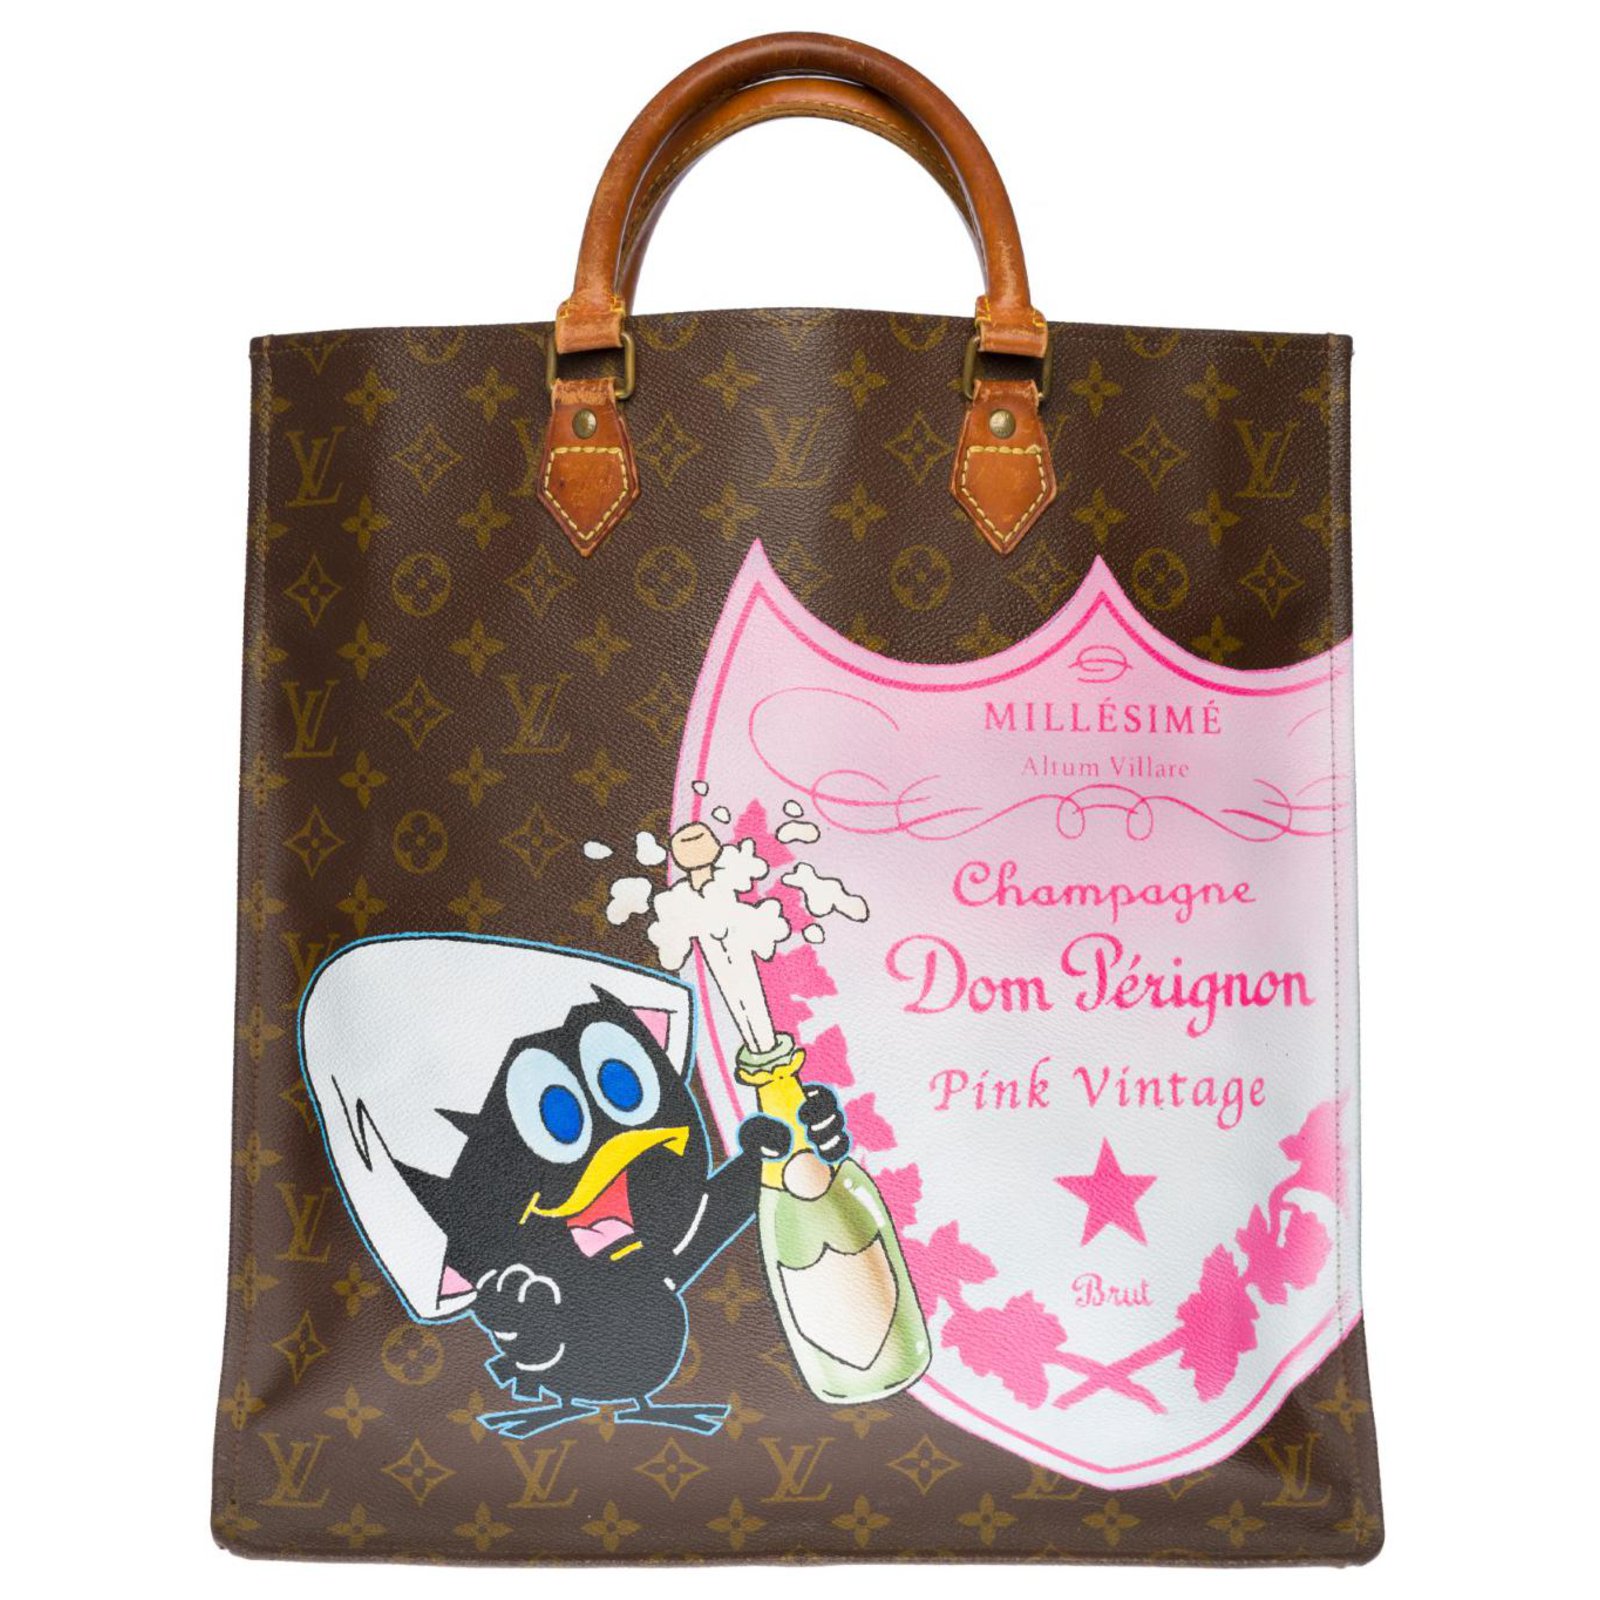 LV fan Page on Instagram Champagne bag by Louis Vuitton   givingcommunity Pic cocolottie